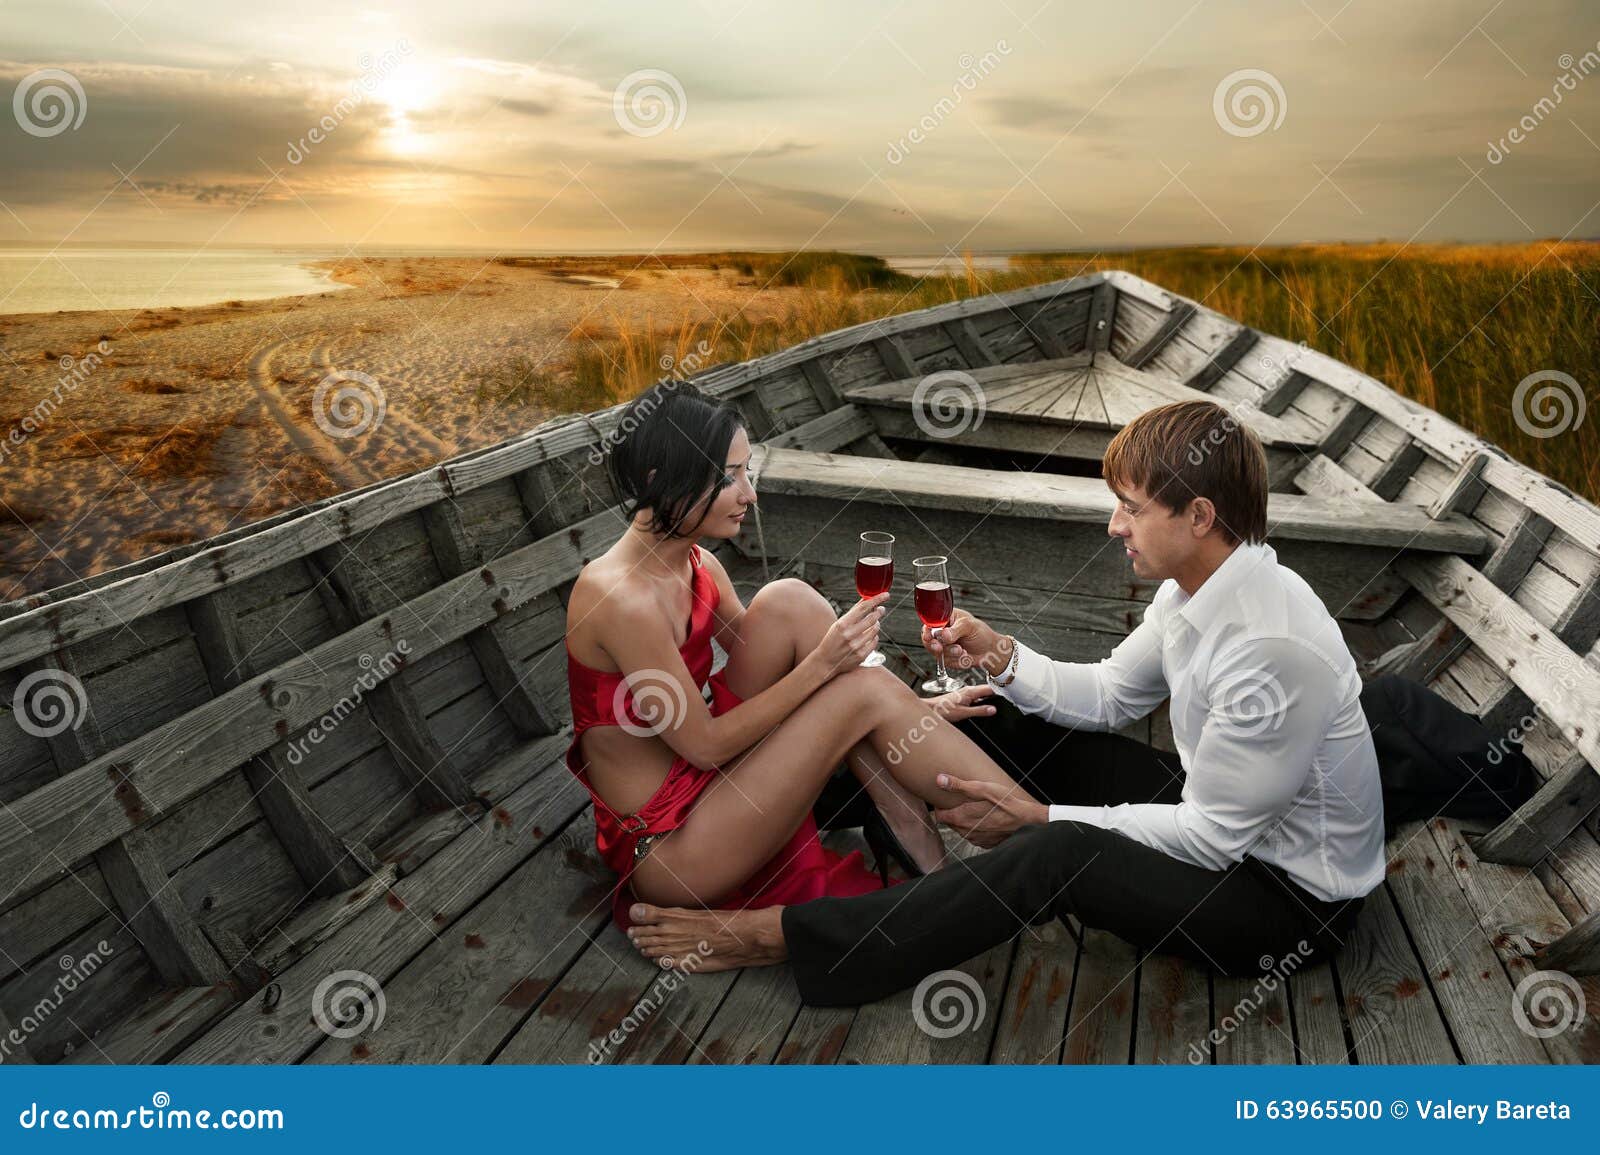 Romantic Stock Images Download 2138917 Royalty Free Photos